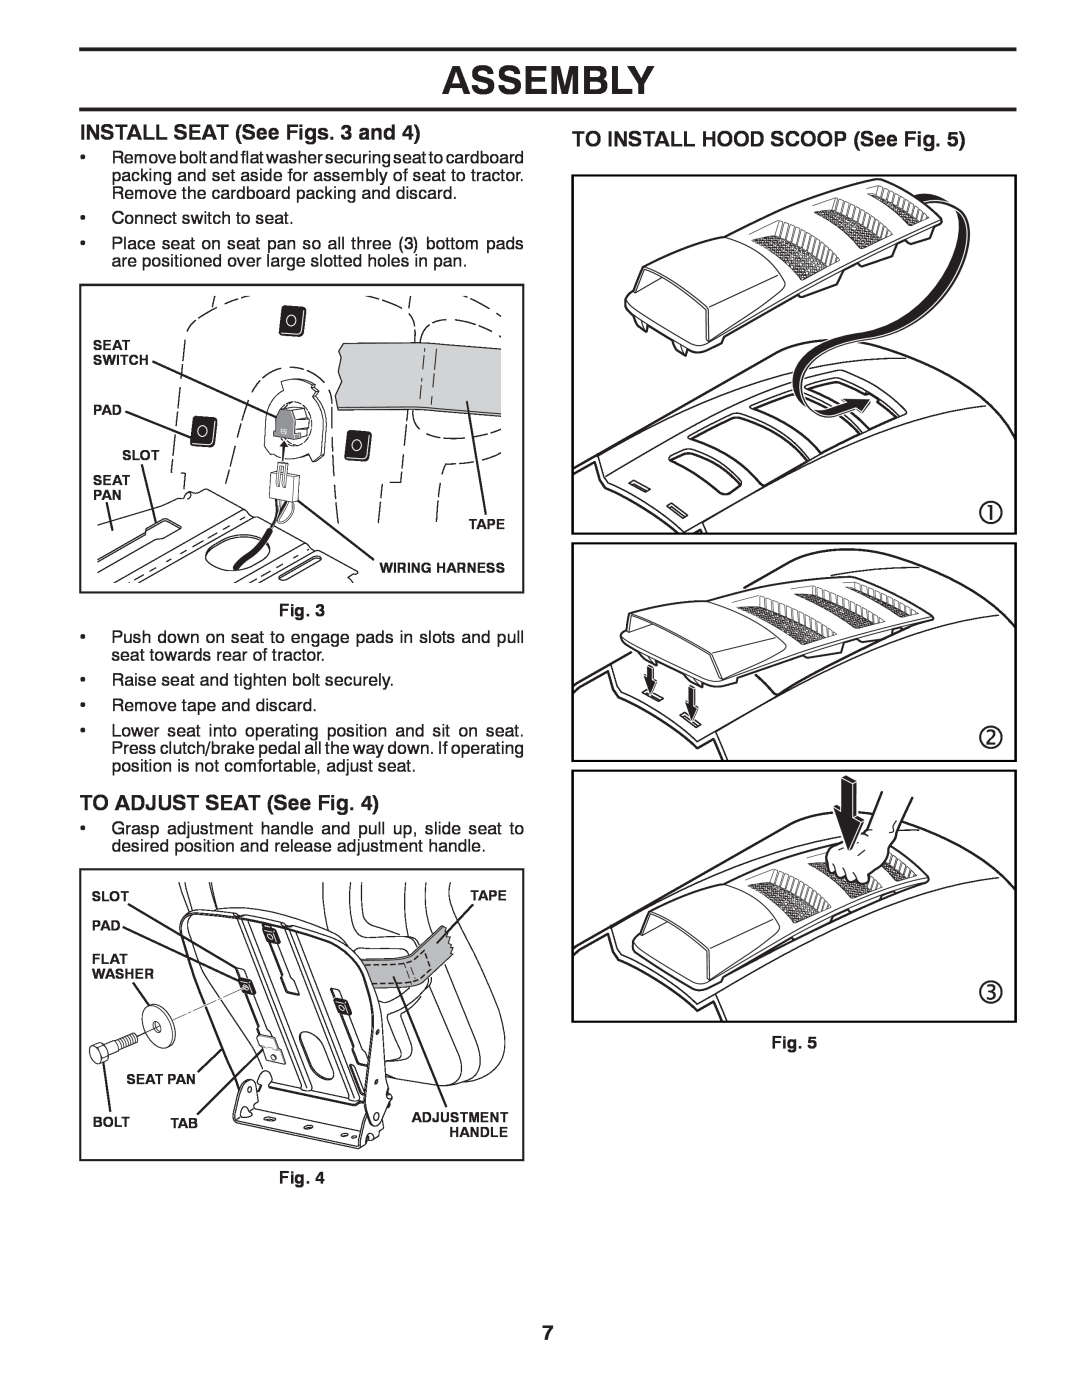 Husqvarna 917.2896 Assembly, INSTALL SEAT See Figs. 3 and, TO ADJUST SEAT See Fig, TO INSTALL HOOD SCOOP See Fig 